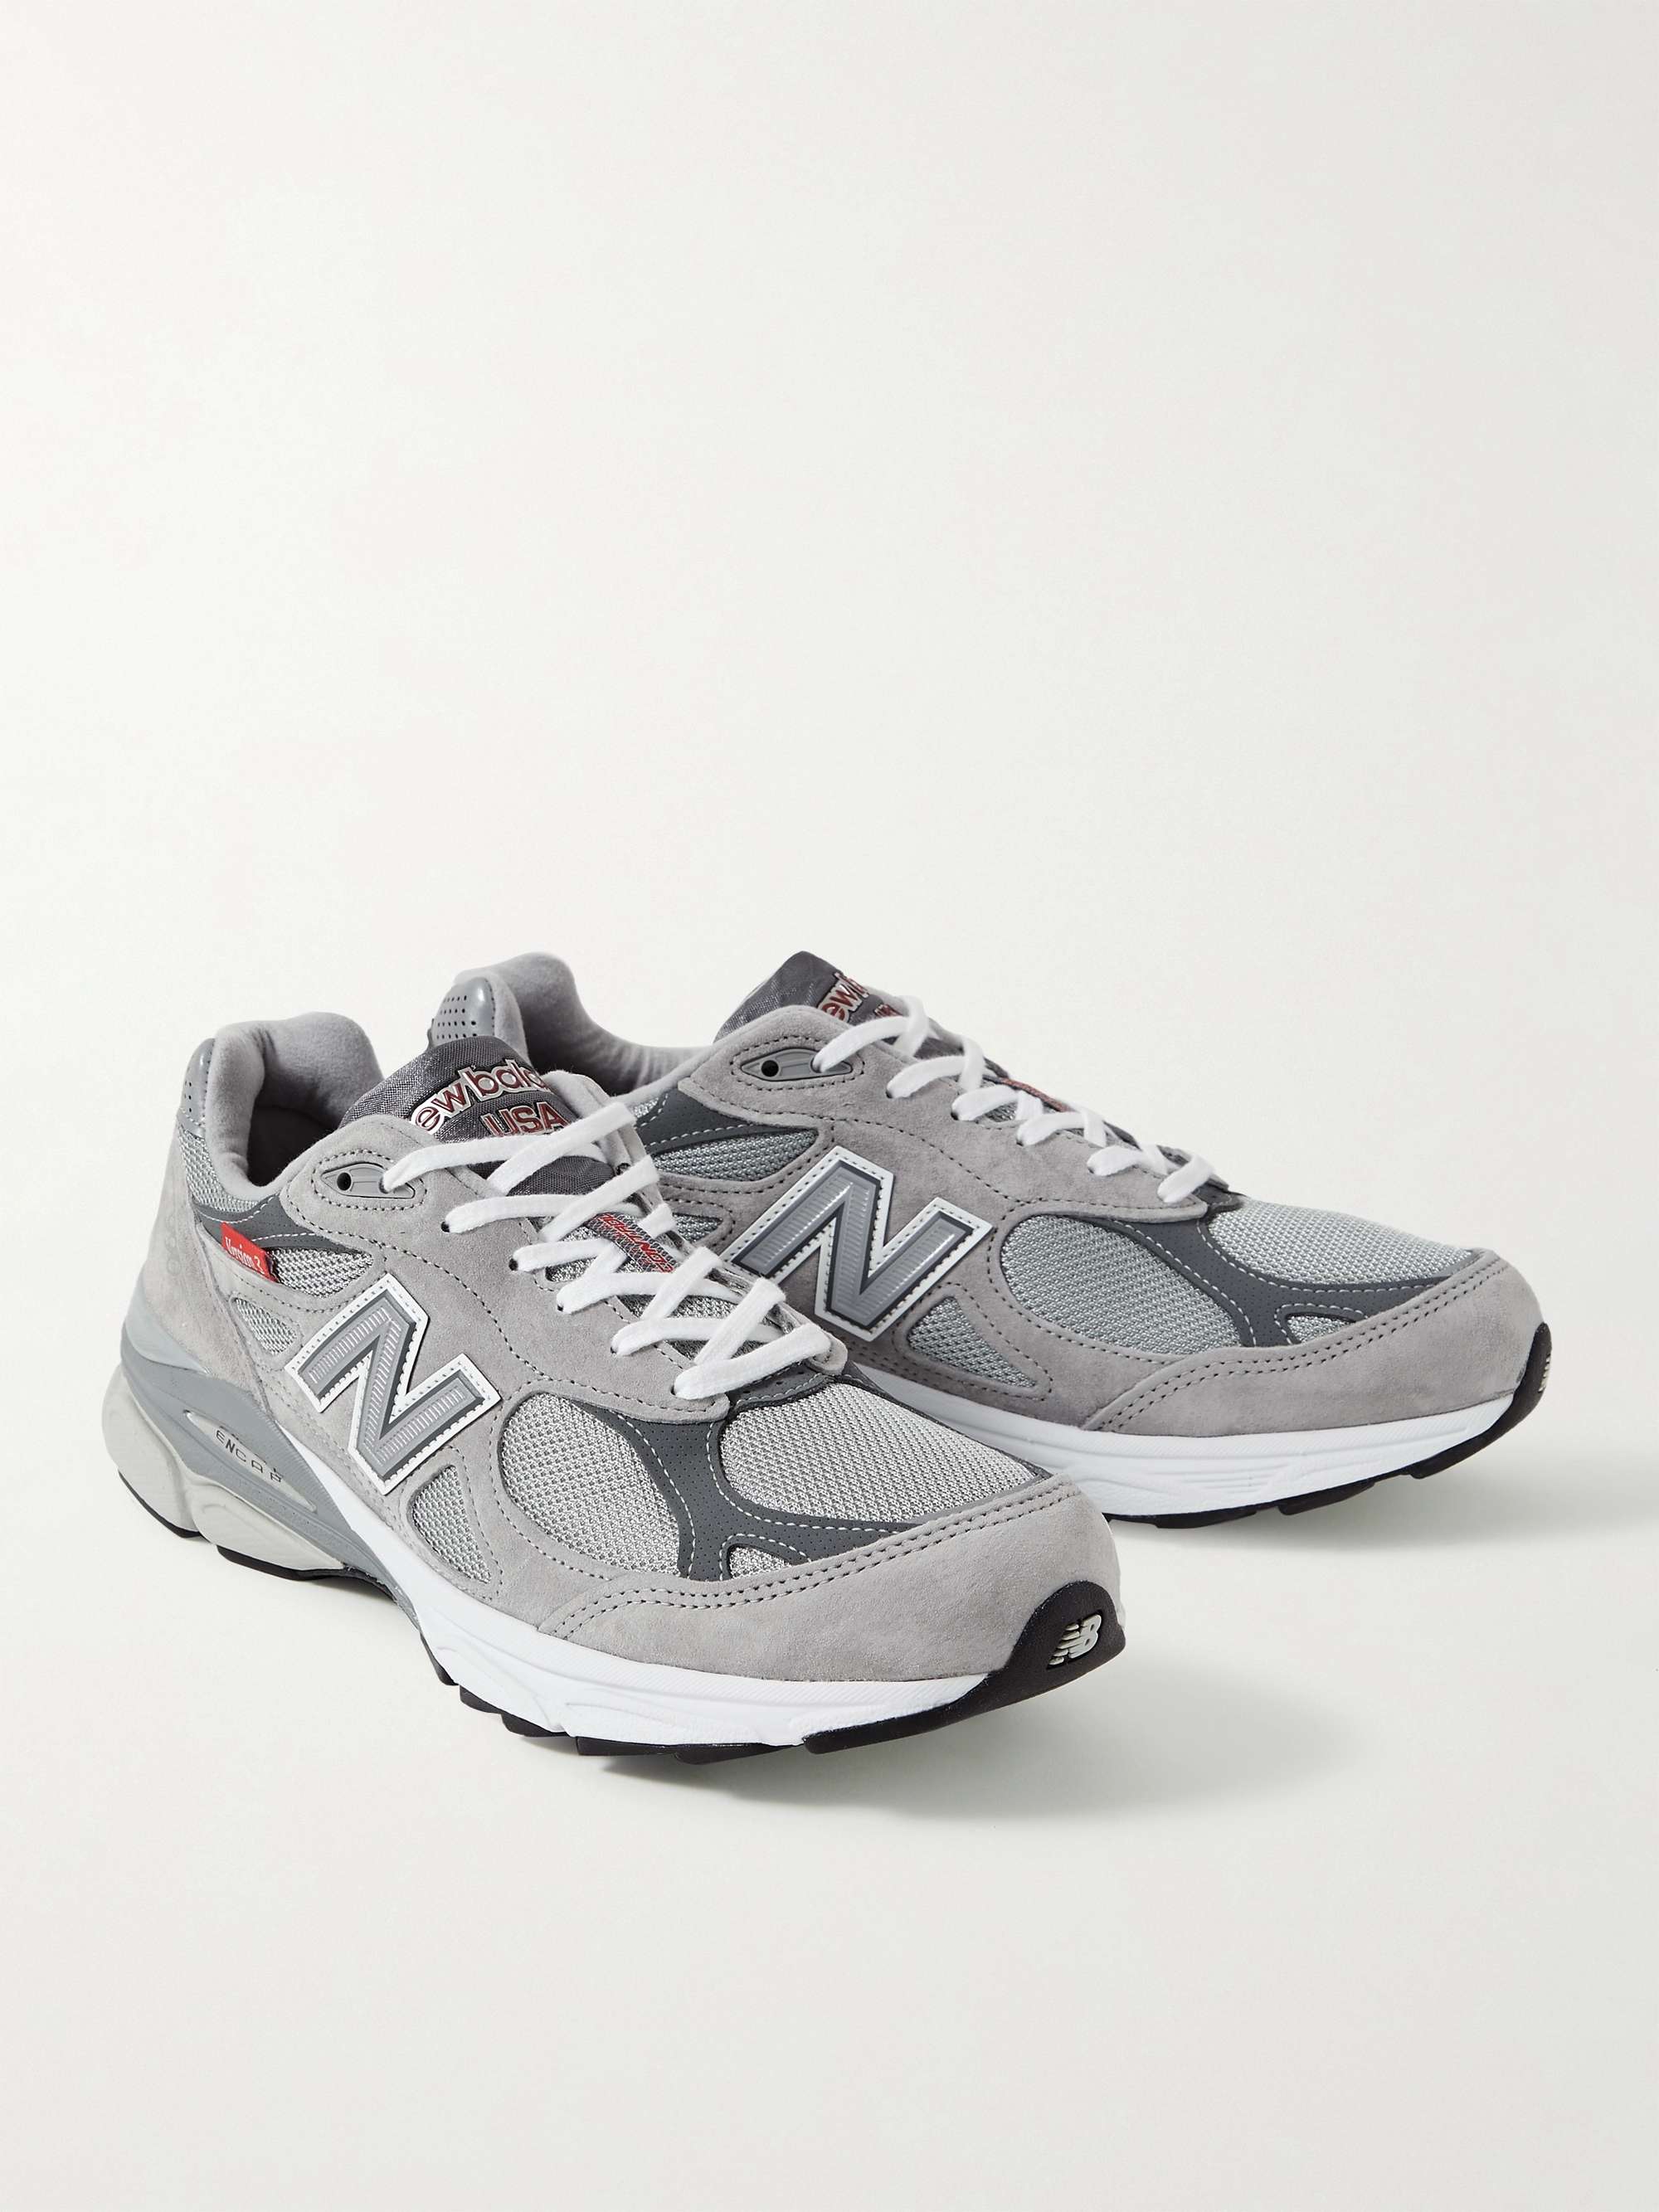 NEW BALANCE 990v3 Suede and Mesh Sneakers